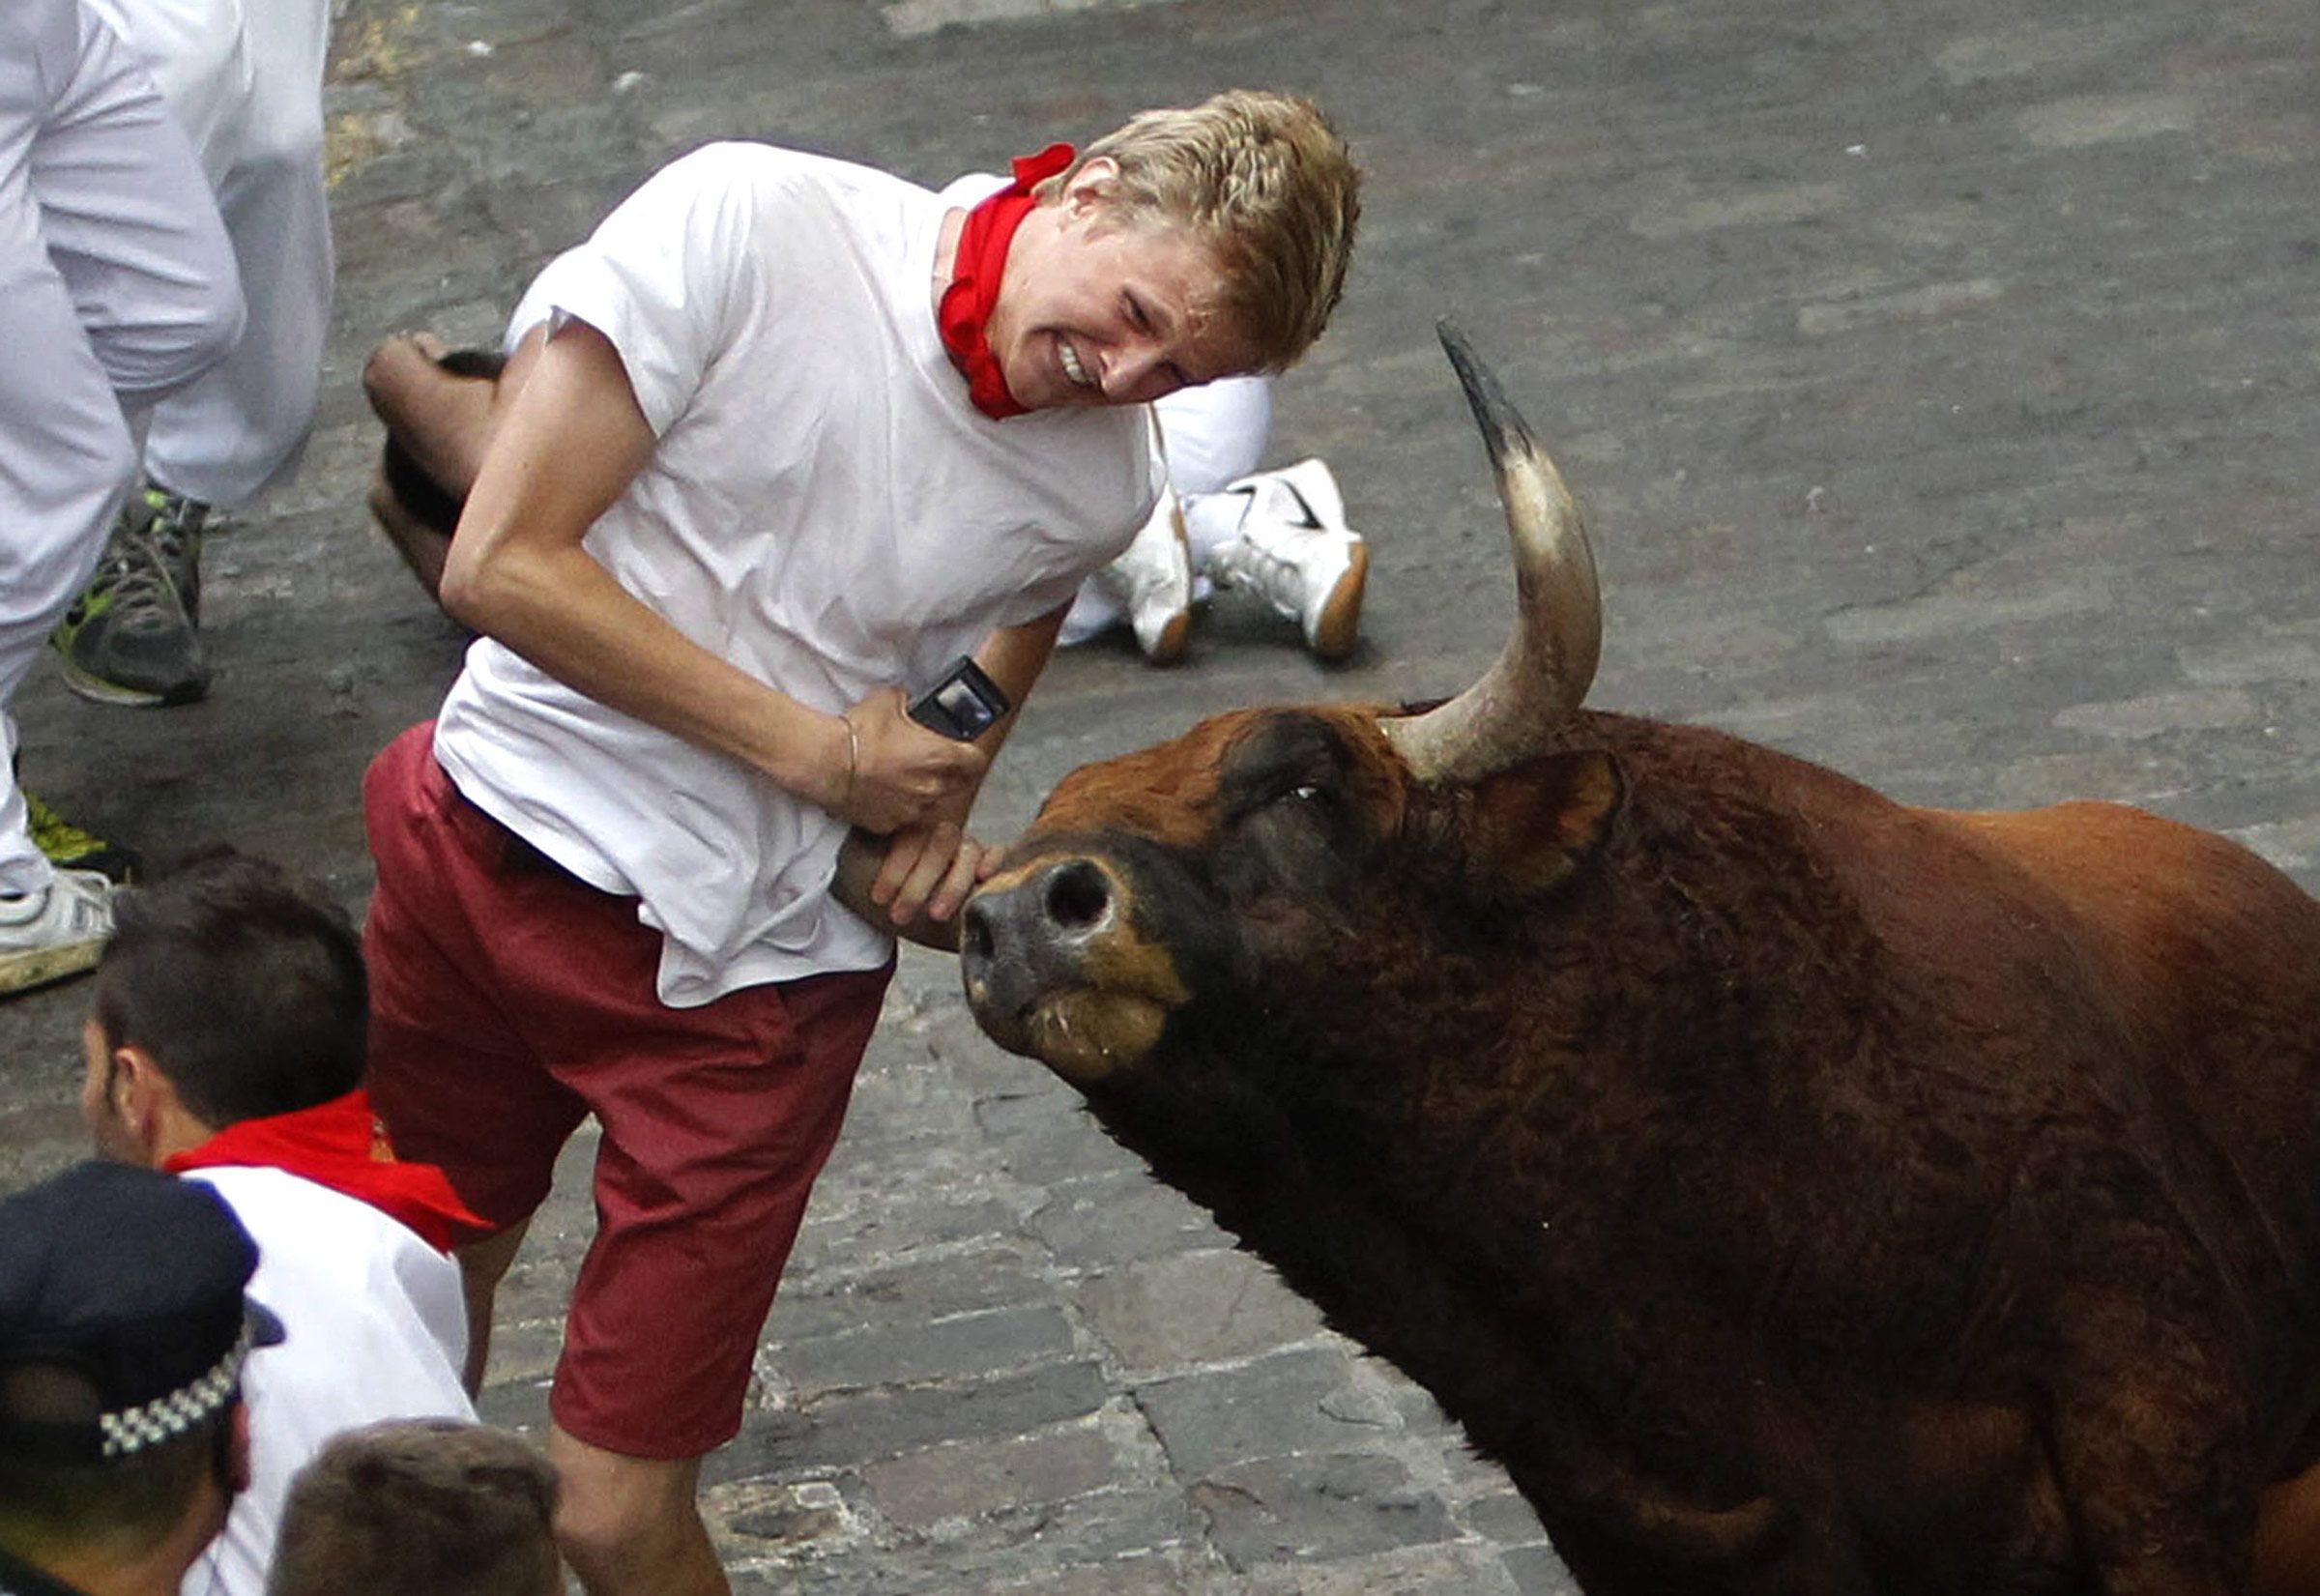 Photo gallery: 2 gored in Pamplona bull run | The Seattle Times